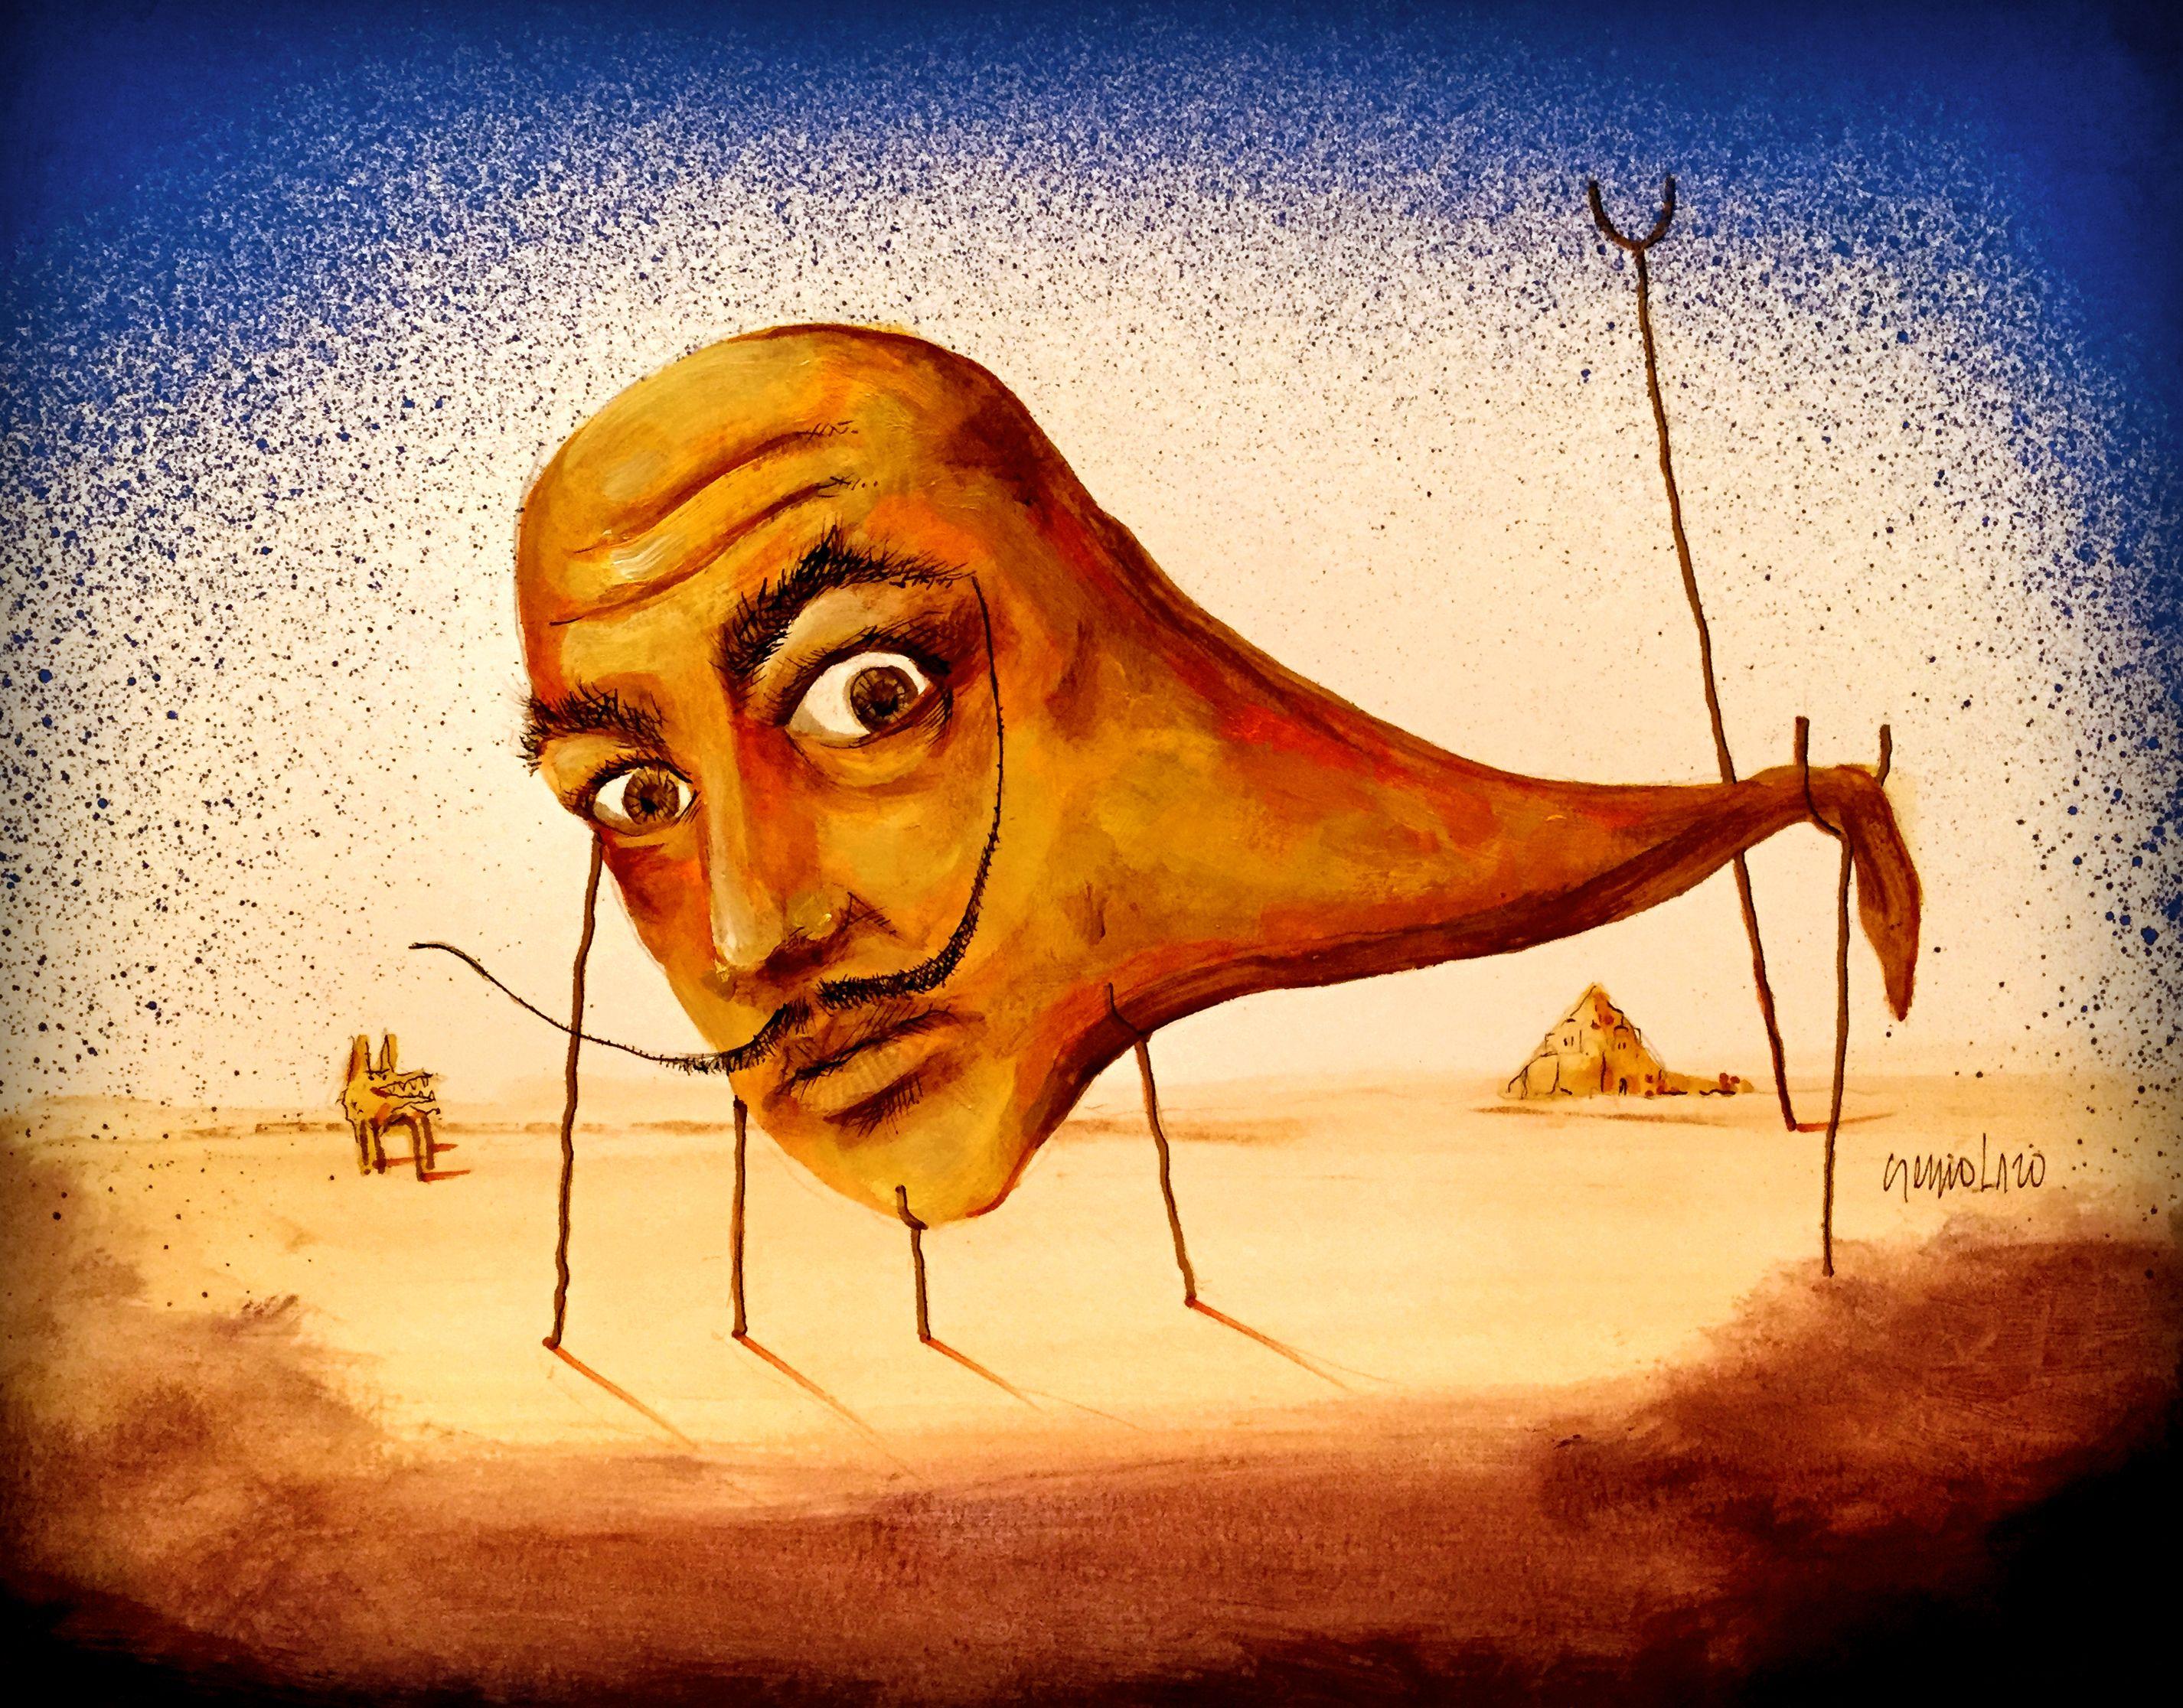 Dali, Drawing, Pen & Ink on Paper - Art by Sergio Lazo